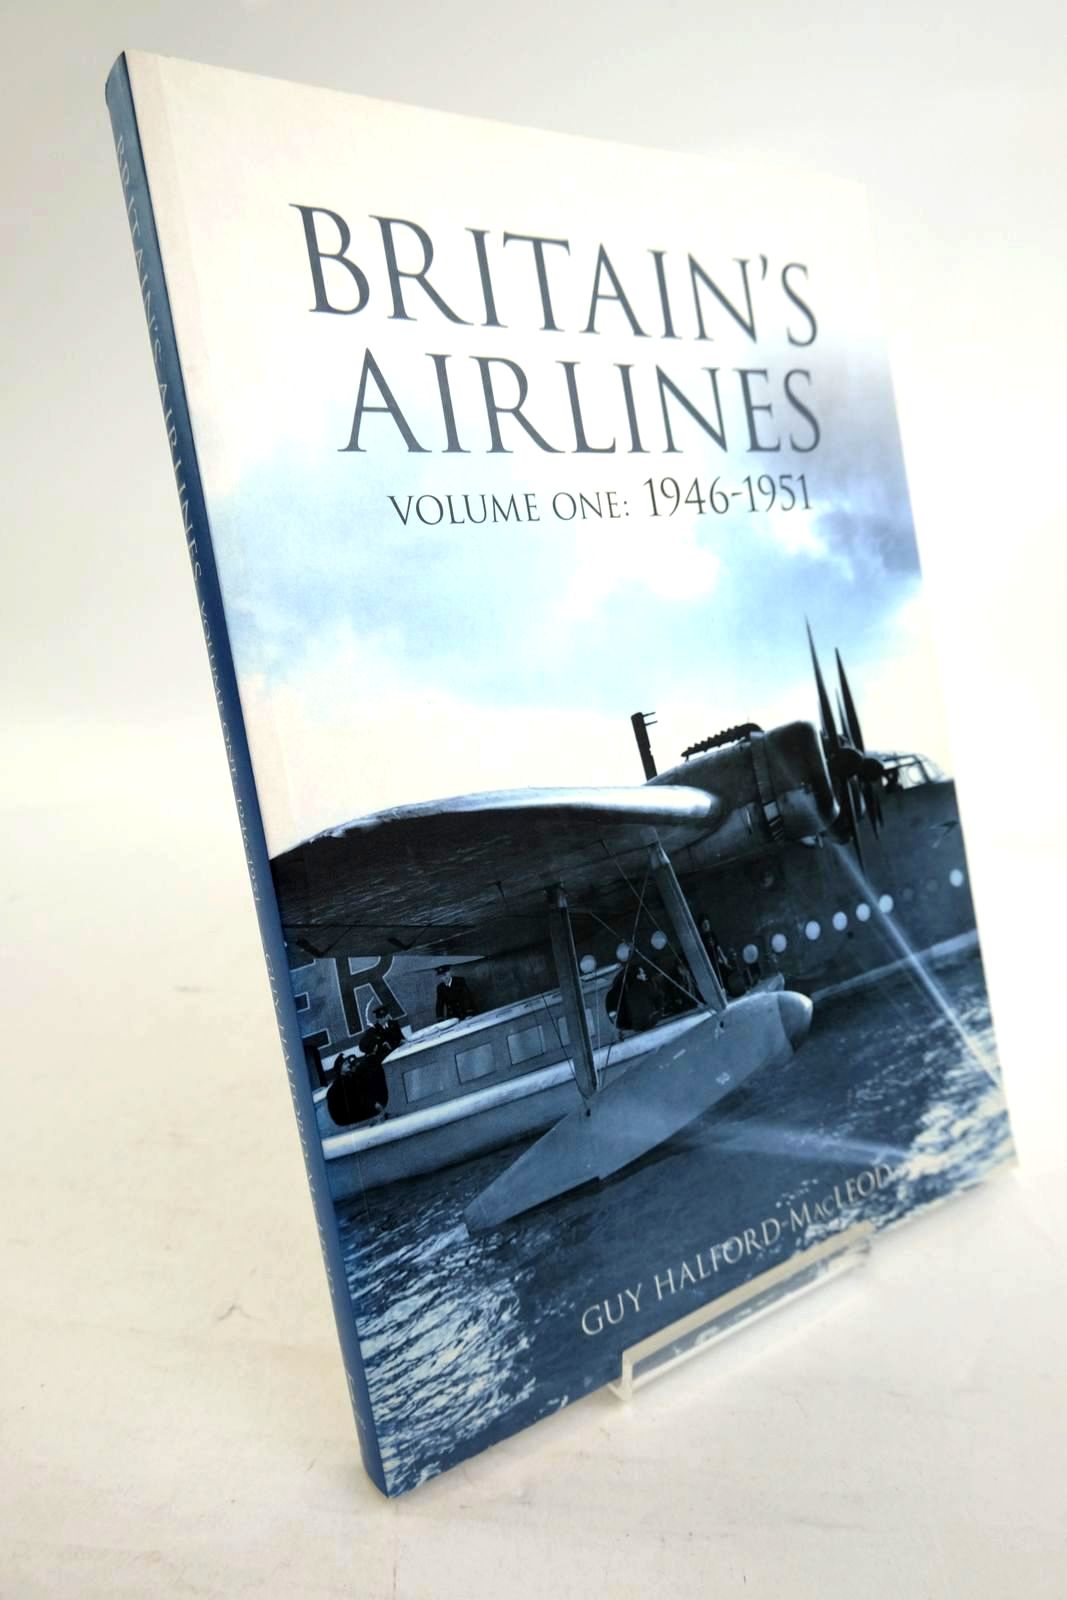 Photo of BRITAIN'S AIRLINES VOLUME ONE: 1946-1951 written by Halford-Macleod, Guy published by Tempus Publishing Ltd (STOCK CODE: 1320276)  for sale by Stella & Rose's Books